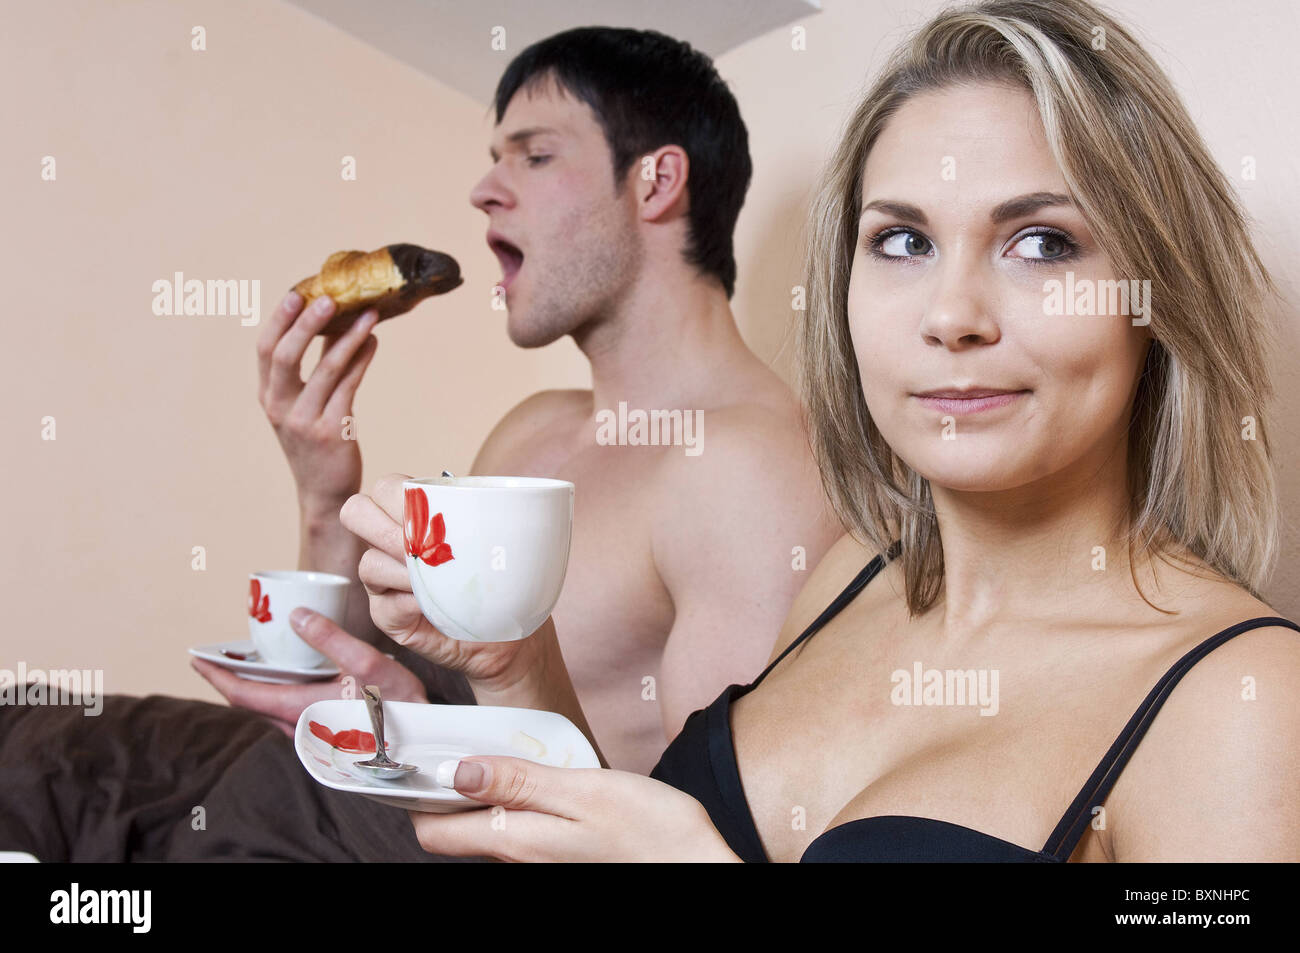 Breakfast together Stock Photo